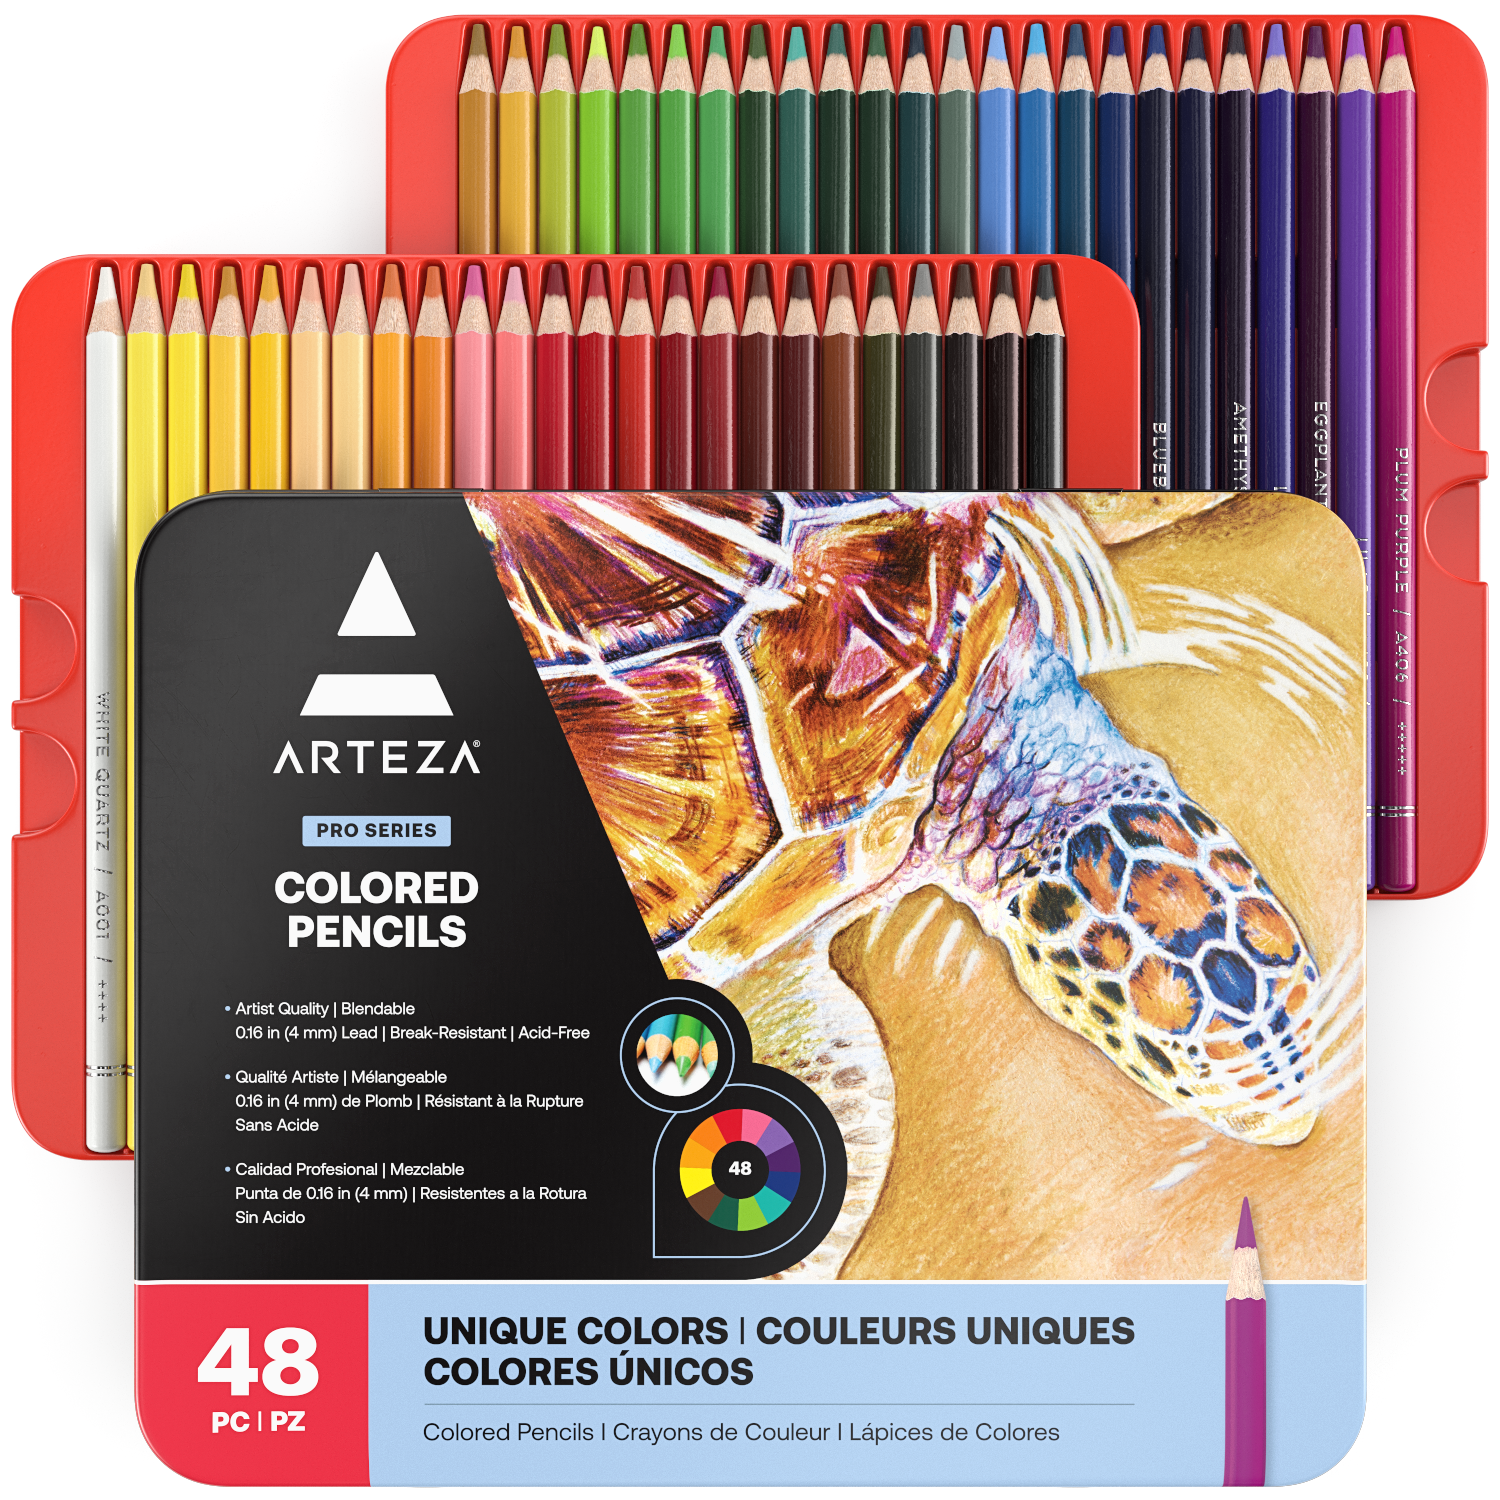 Pencil paradise: top 10 review of the best colored pencils